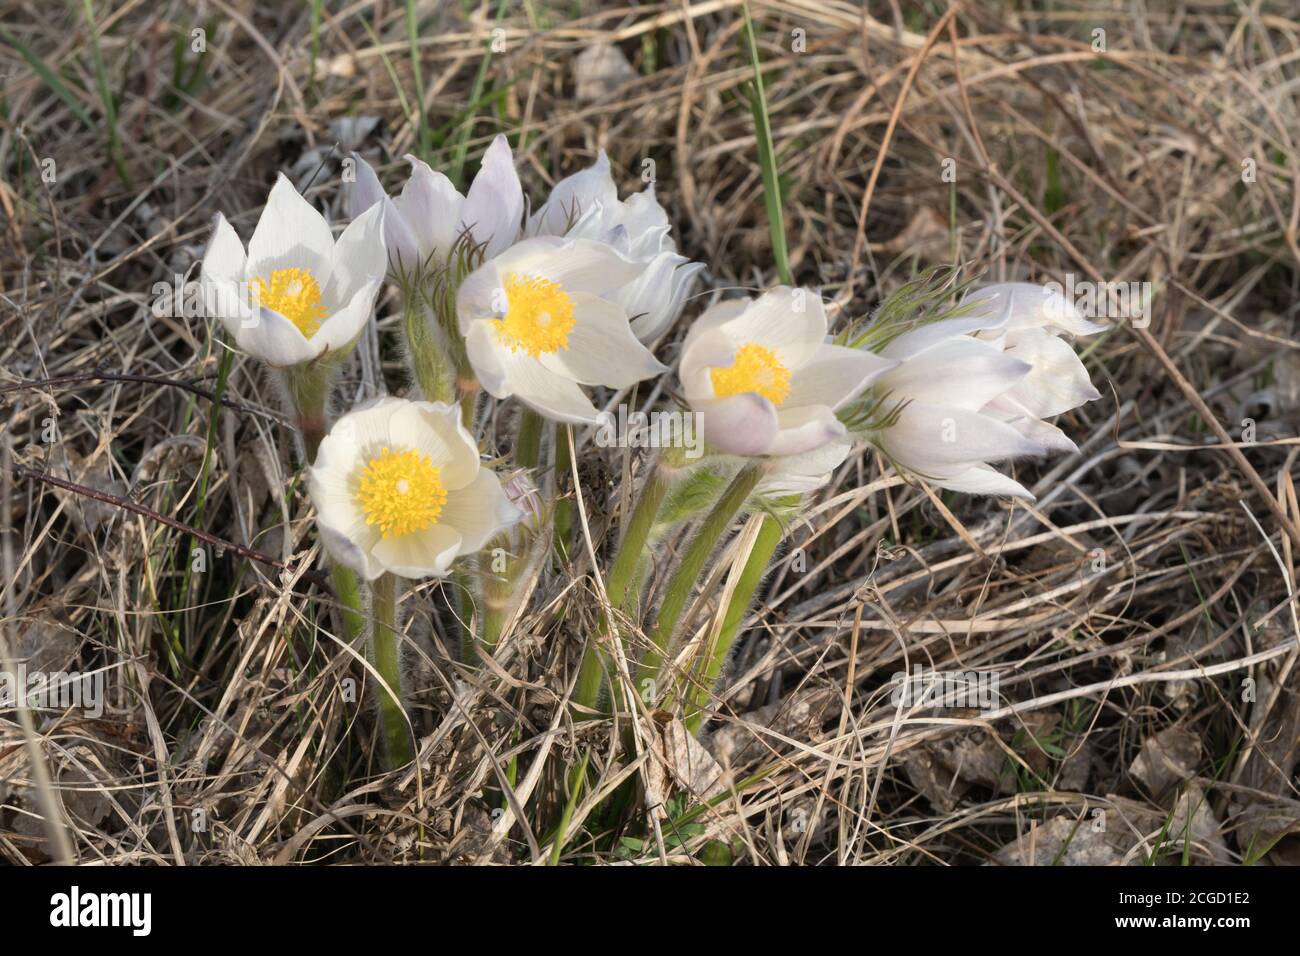 Wild white flowers of Pulsatilla or spreading pasqueflower among dried grass in the early spring. Stock Photo